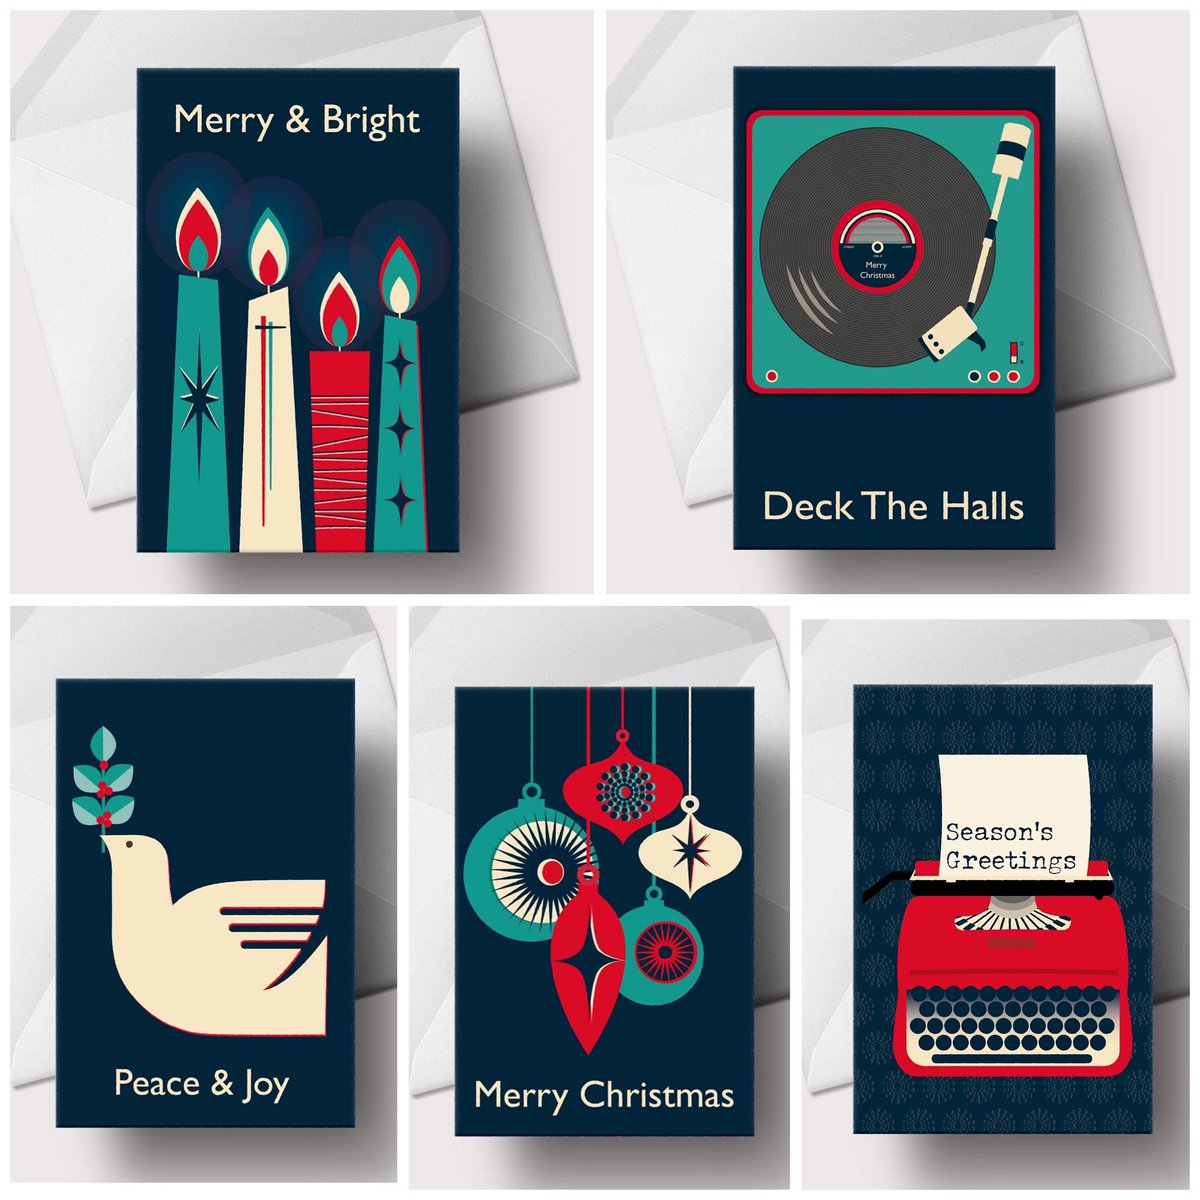 WIN a set of Christmas cards Retweet and follow me to enter I’ll pick a winner after 9pm tonight gailmyerscough.co.uk/christmas-cards #Christmas #illustration #supportsmallbusiness